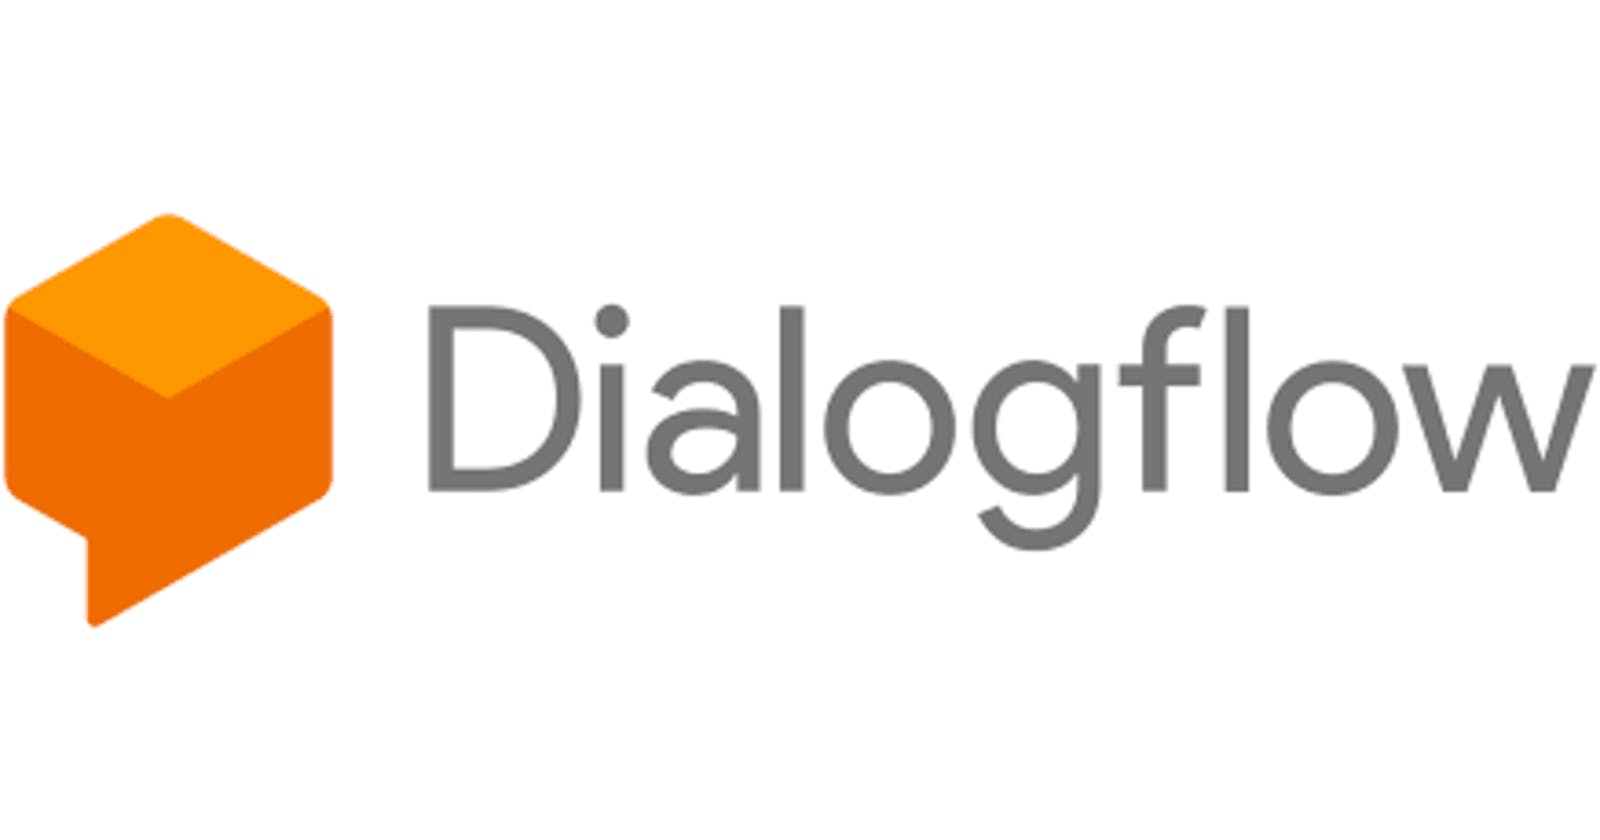 Part 1: Introduction to Google Dialogflow: What it is and Why You Should Use it